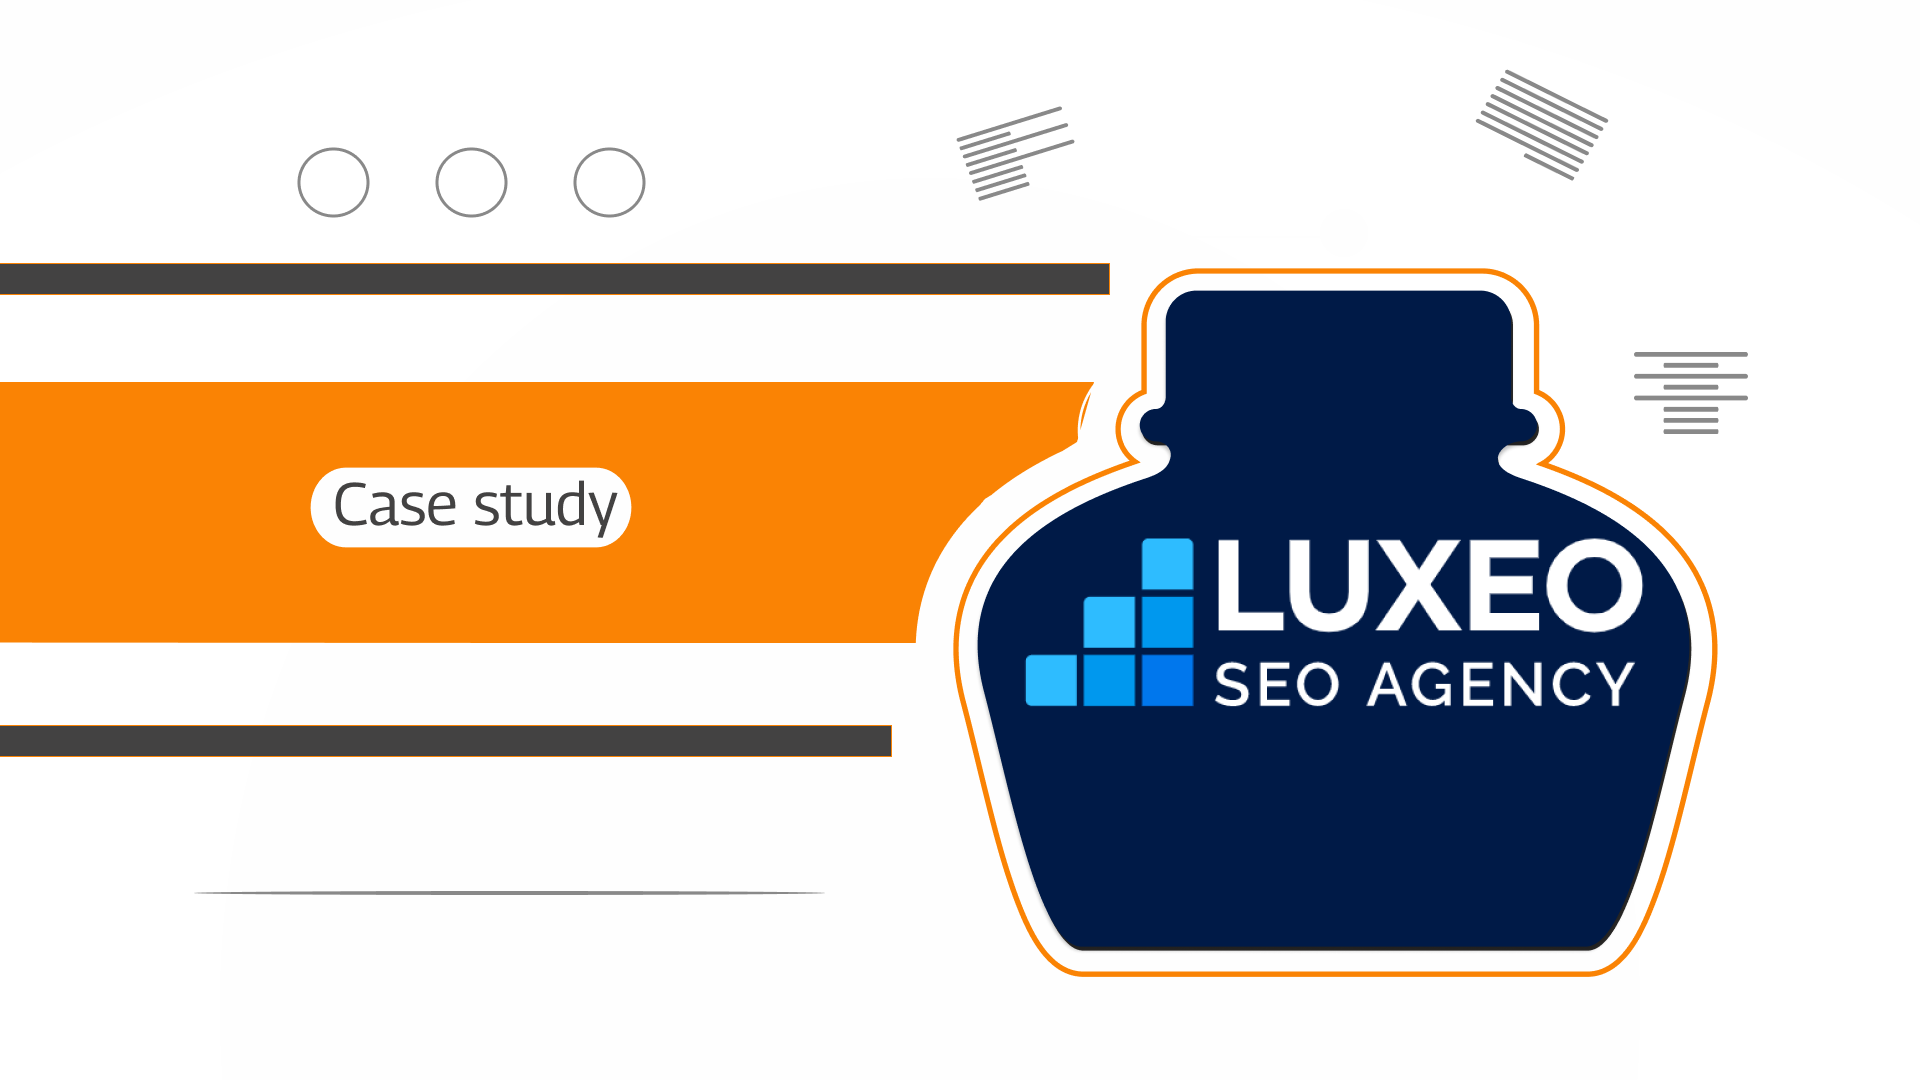 How Did We Content the SEO Agency Luxeo Website: From Services to Cases